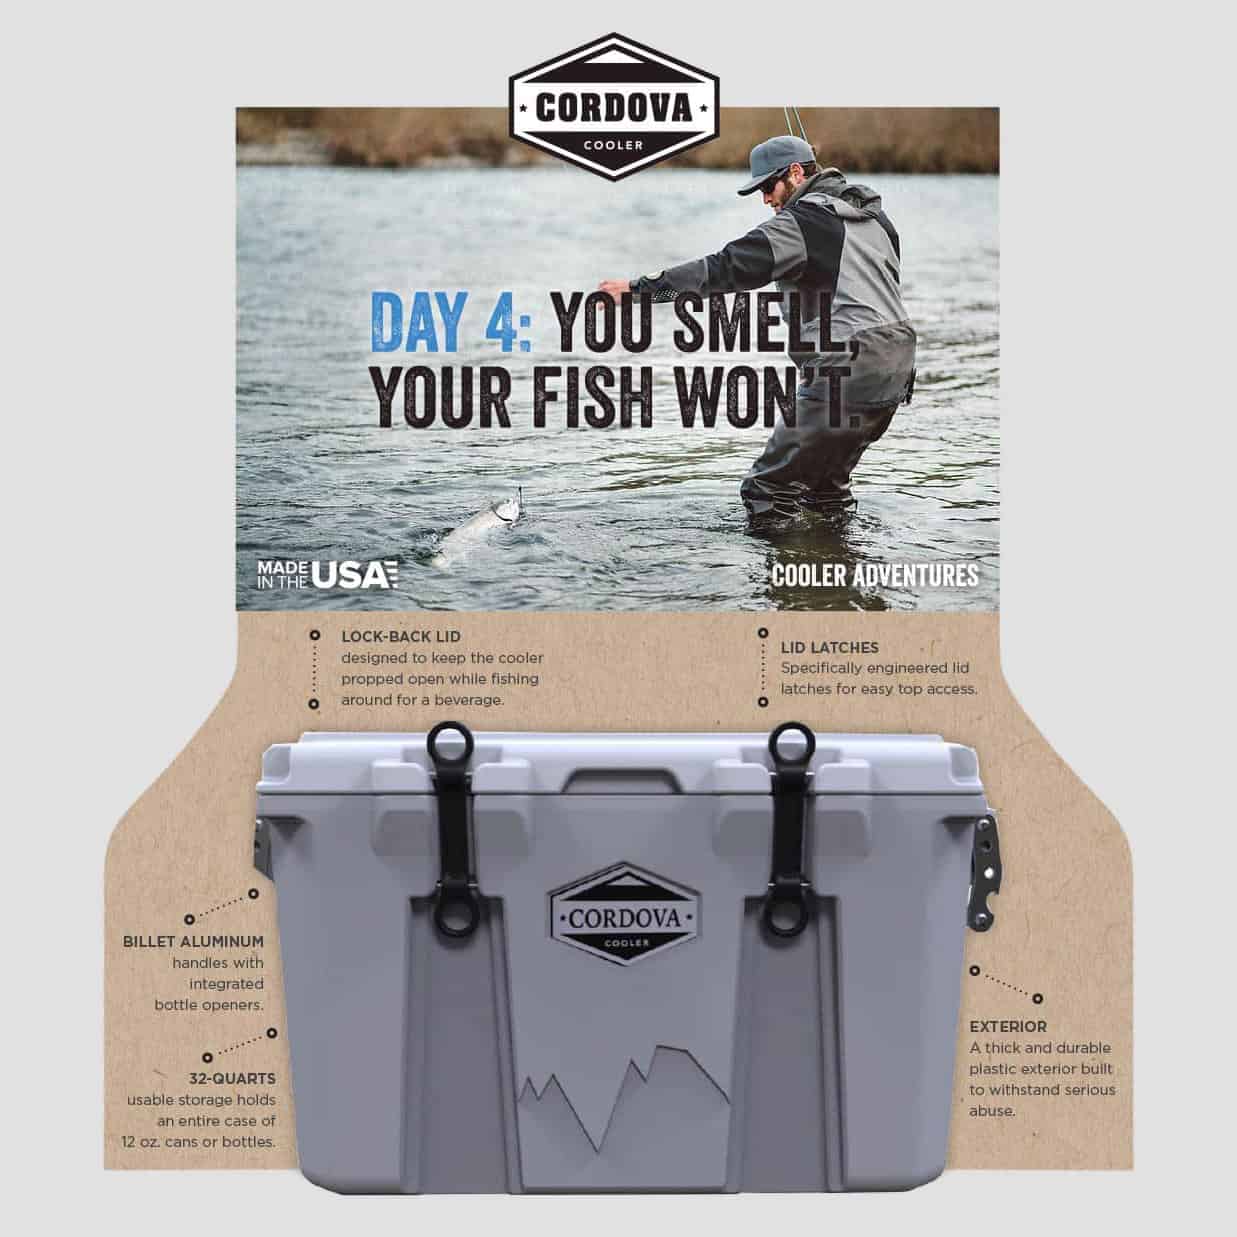 Grow Social Media Community | Cordova Coolers | Case Study | Commit Agency